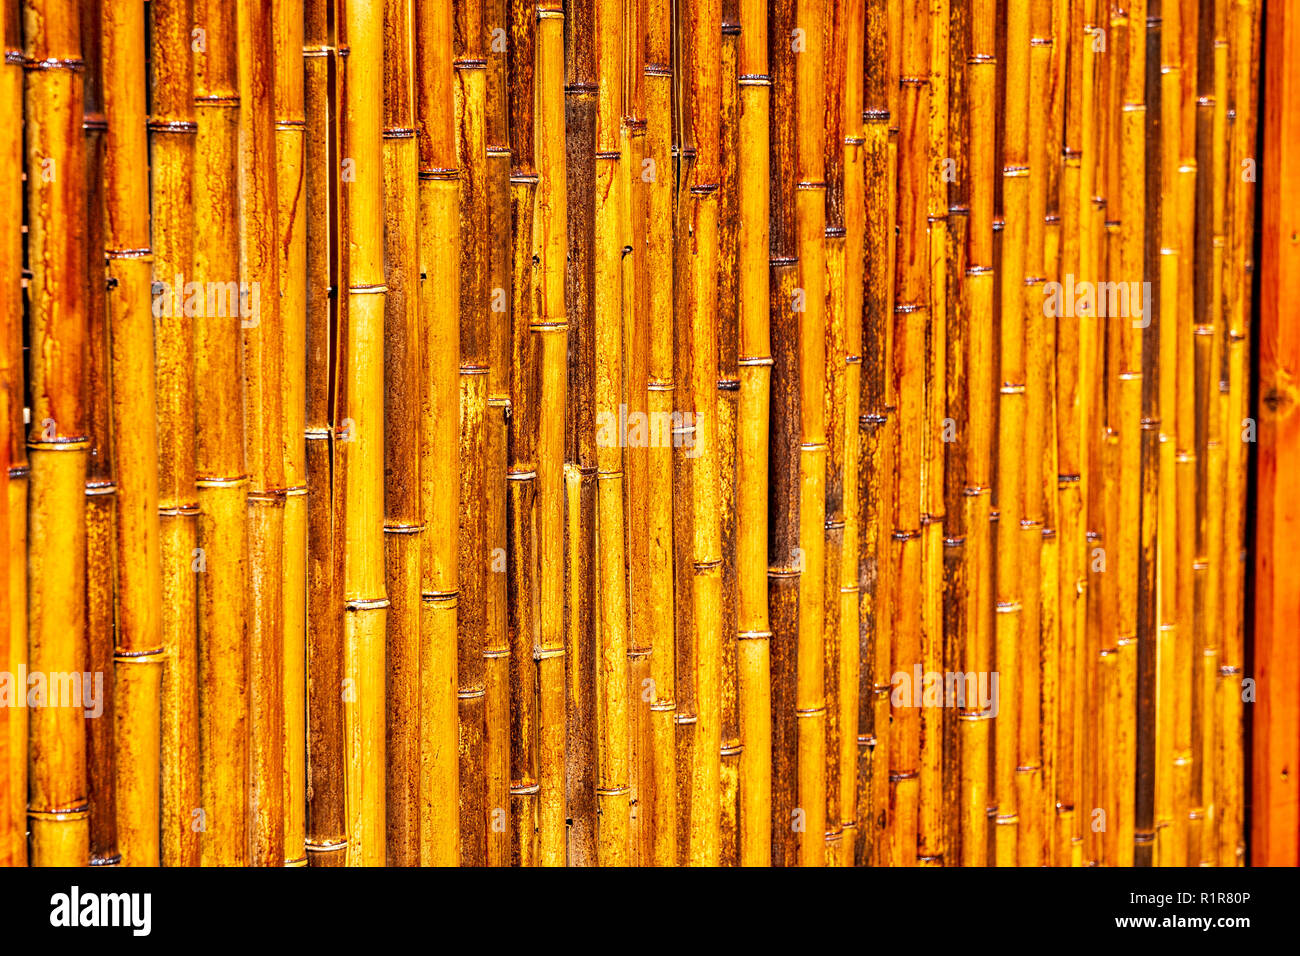 Bamboo fence creates graphic patterns Stock Photo